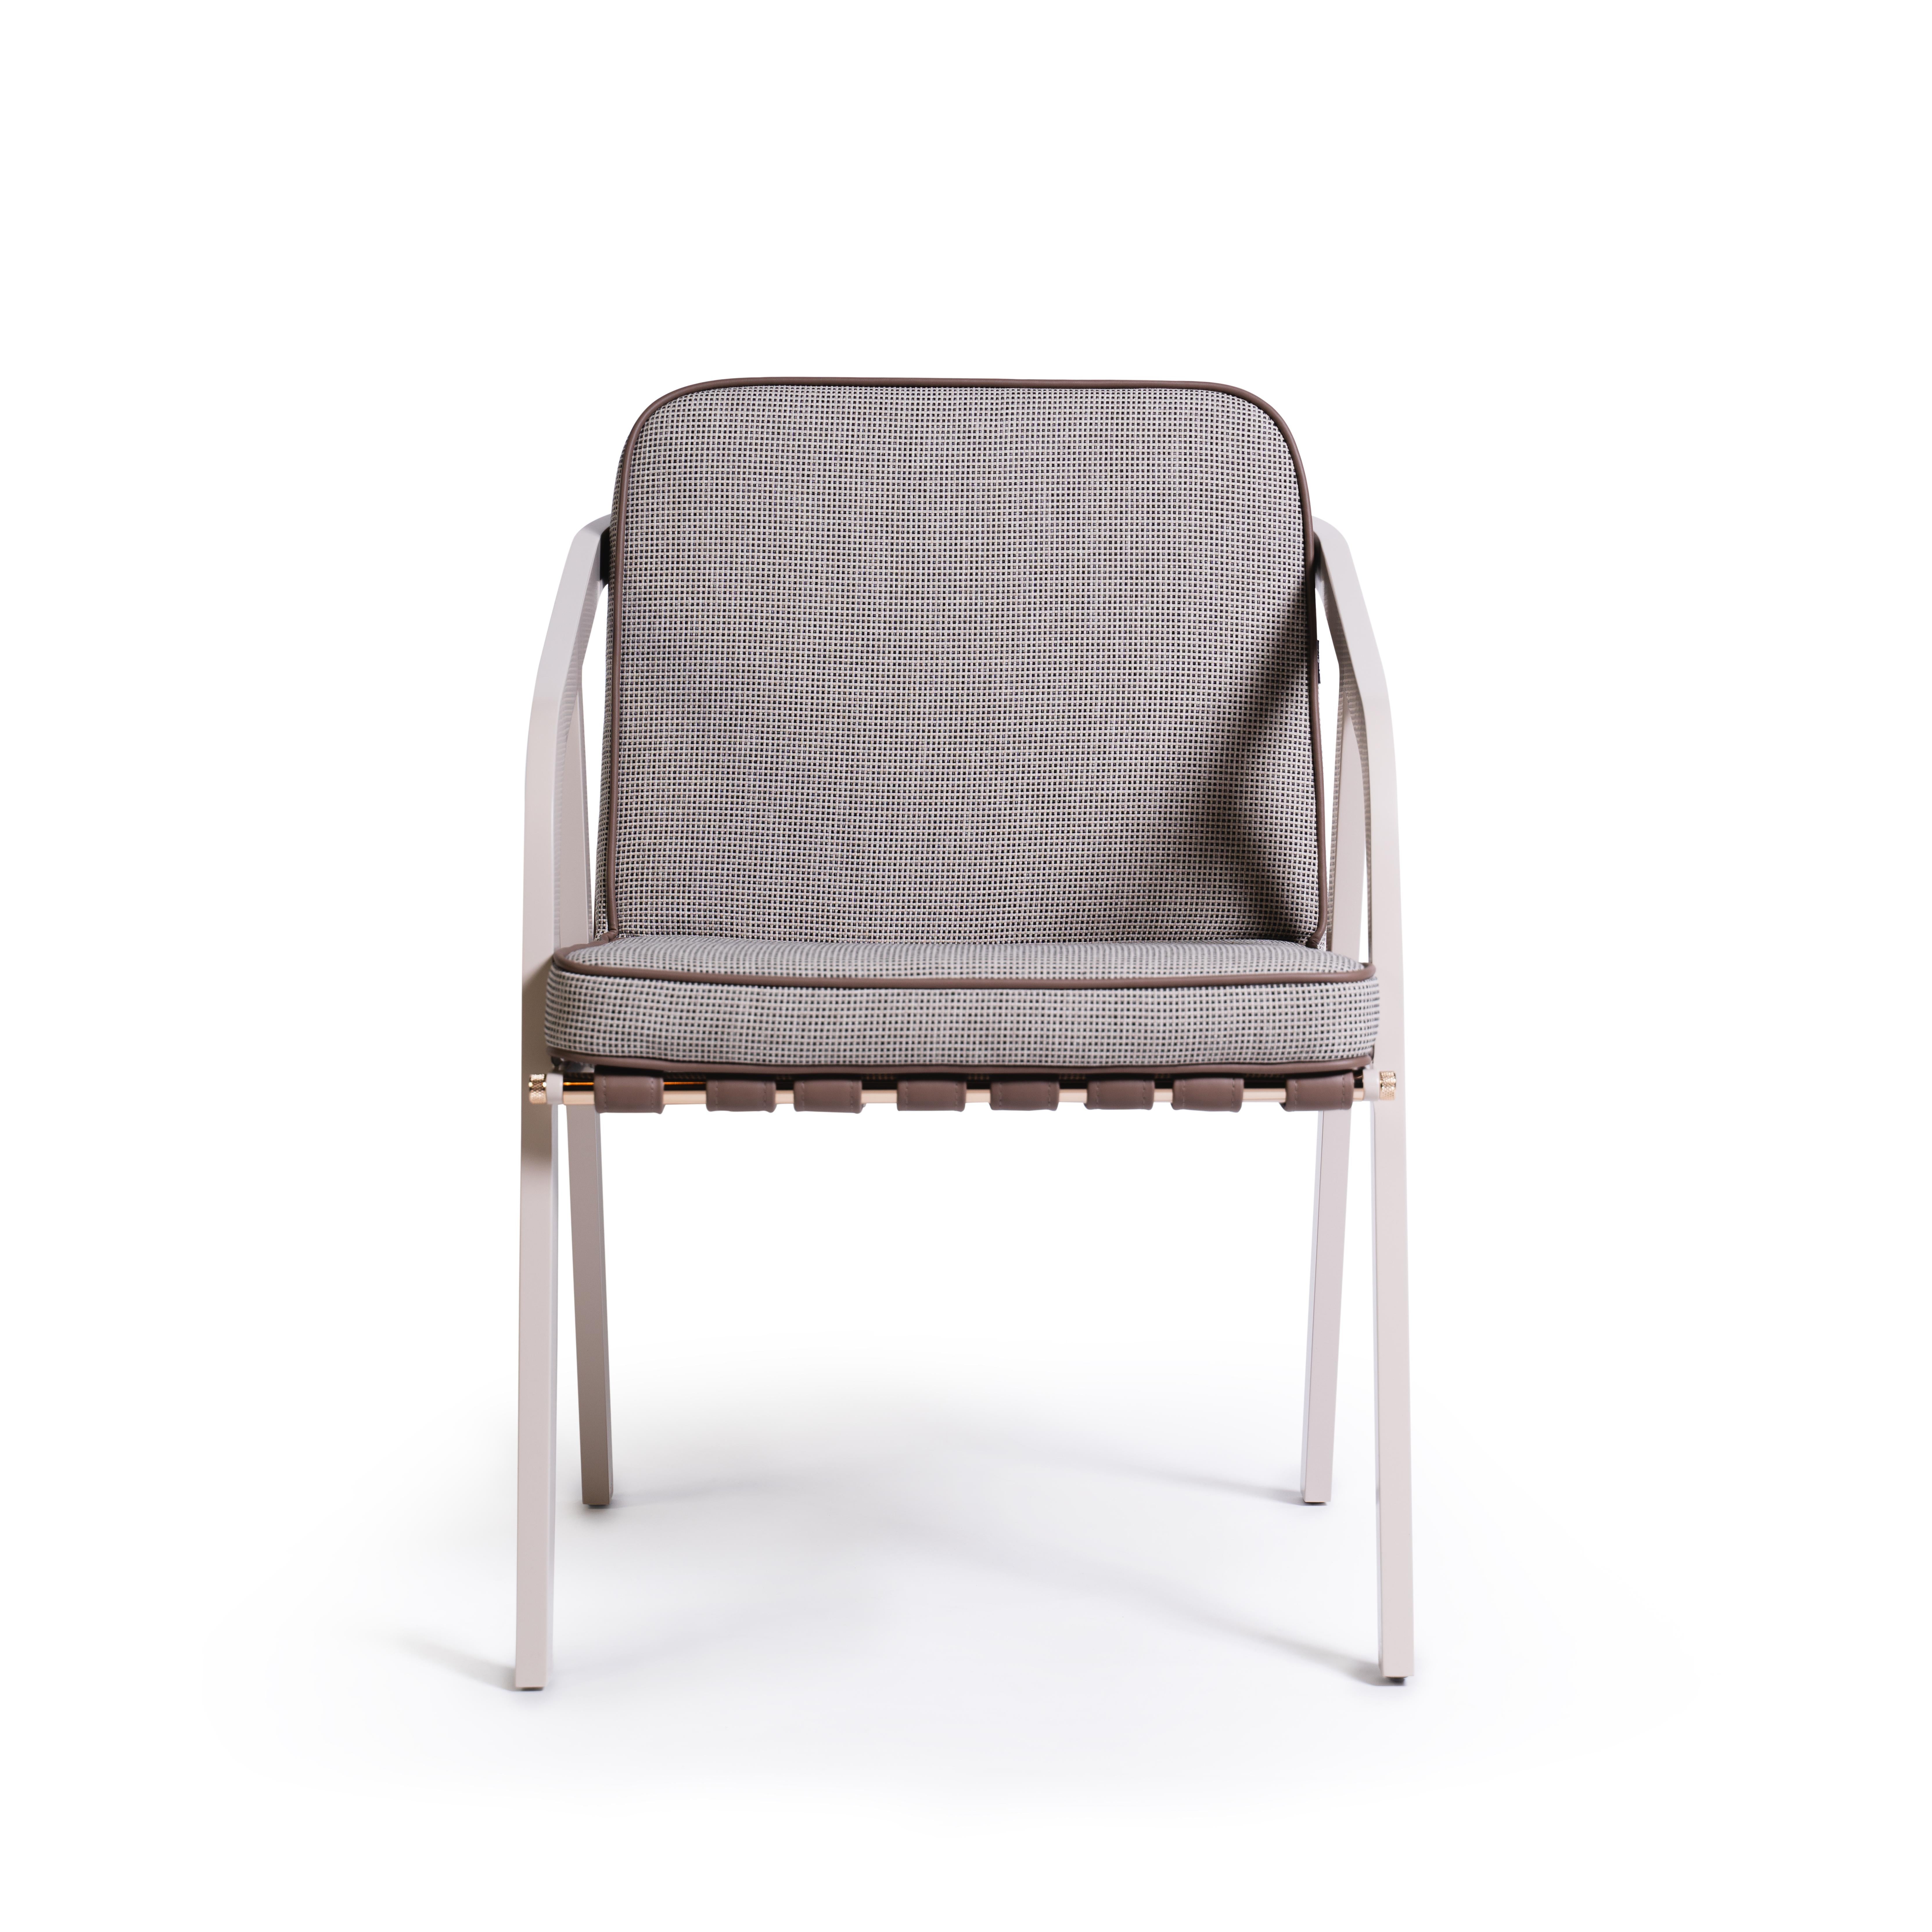 Ribbon - Outdoor dining chair 
Contemporary outdoor dining chair made with structure: White lacquered aluminum, Metallic details: Nickel-plated, Upholstery: Acrylic fabric, Pipping: Outdoor synthetic leather, Straps: Outdoor Synthetic Leather

Due